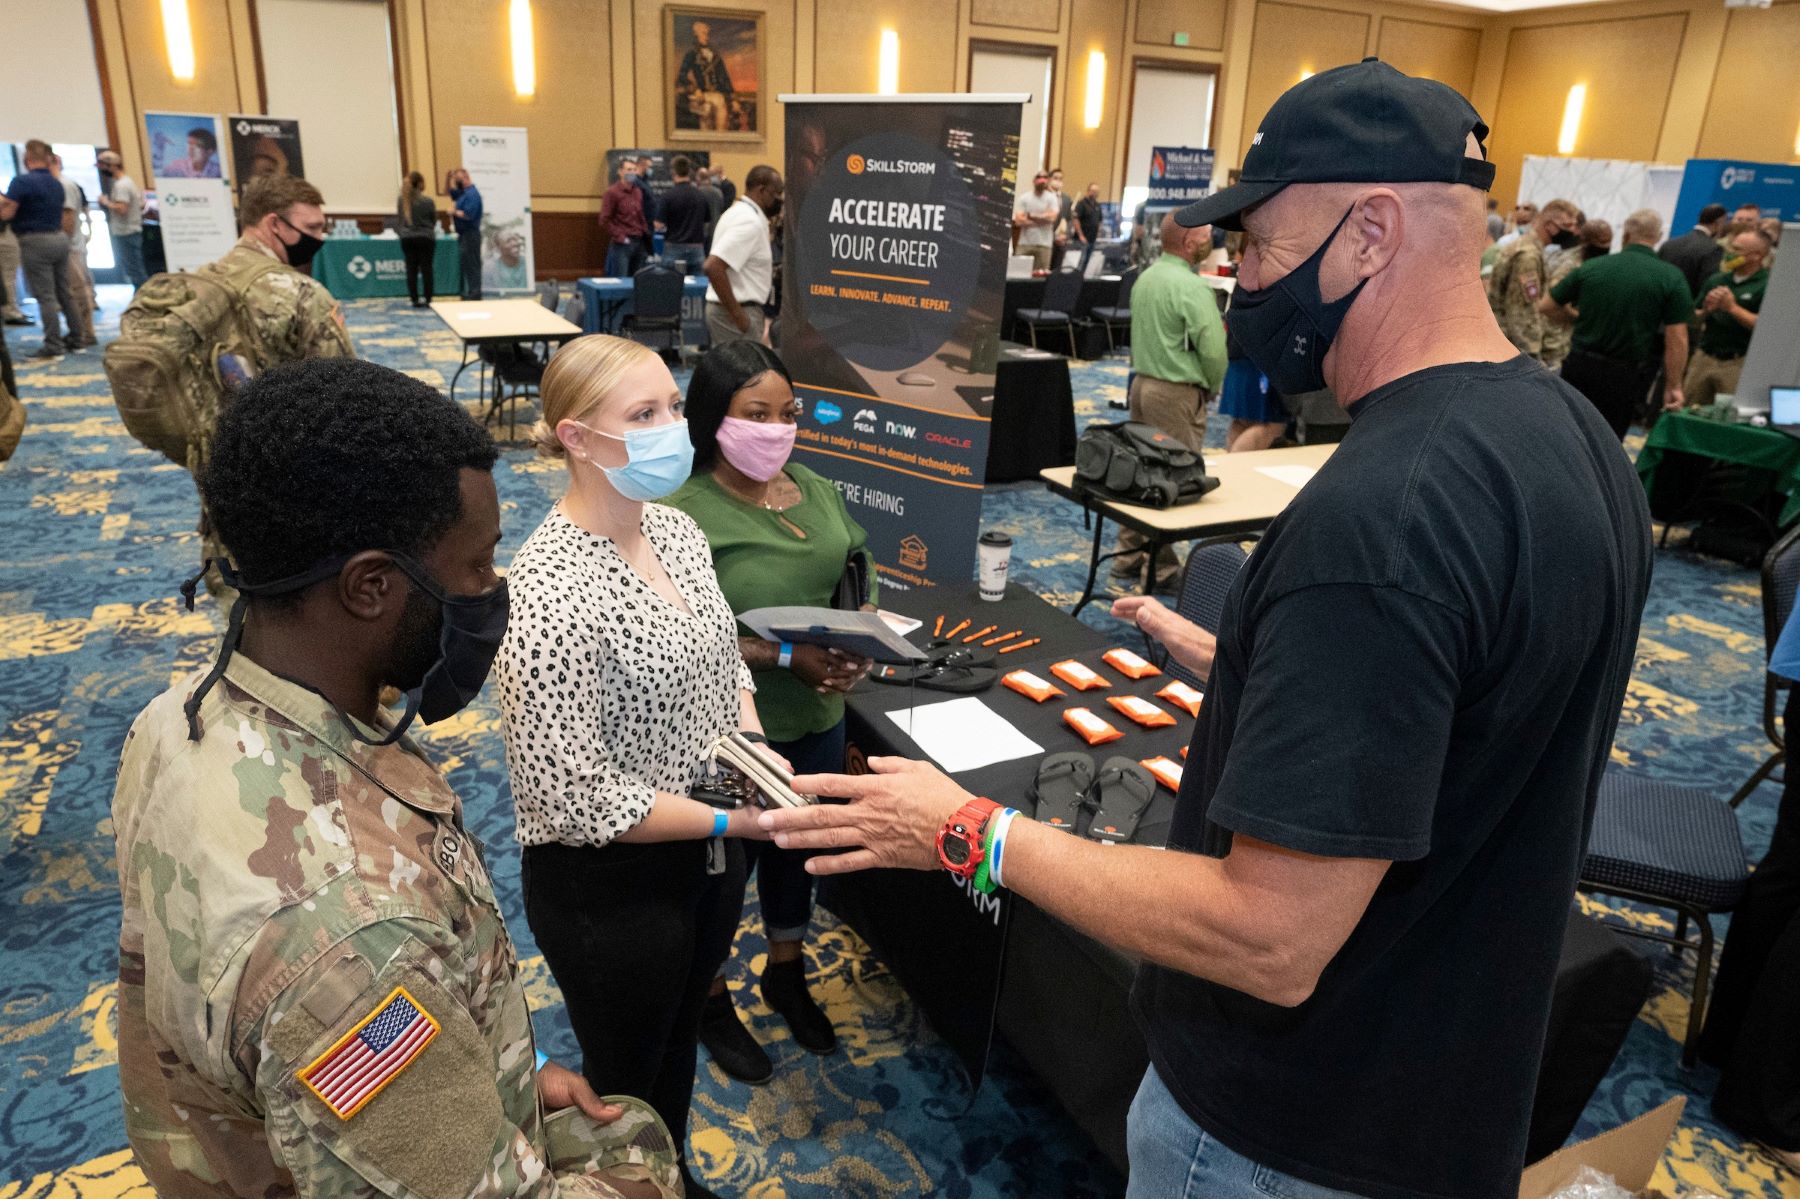 Job seekers talk to employer at Fort Bragg